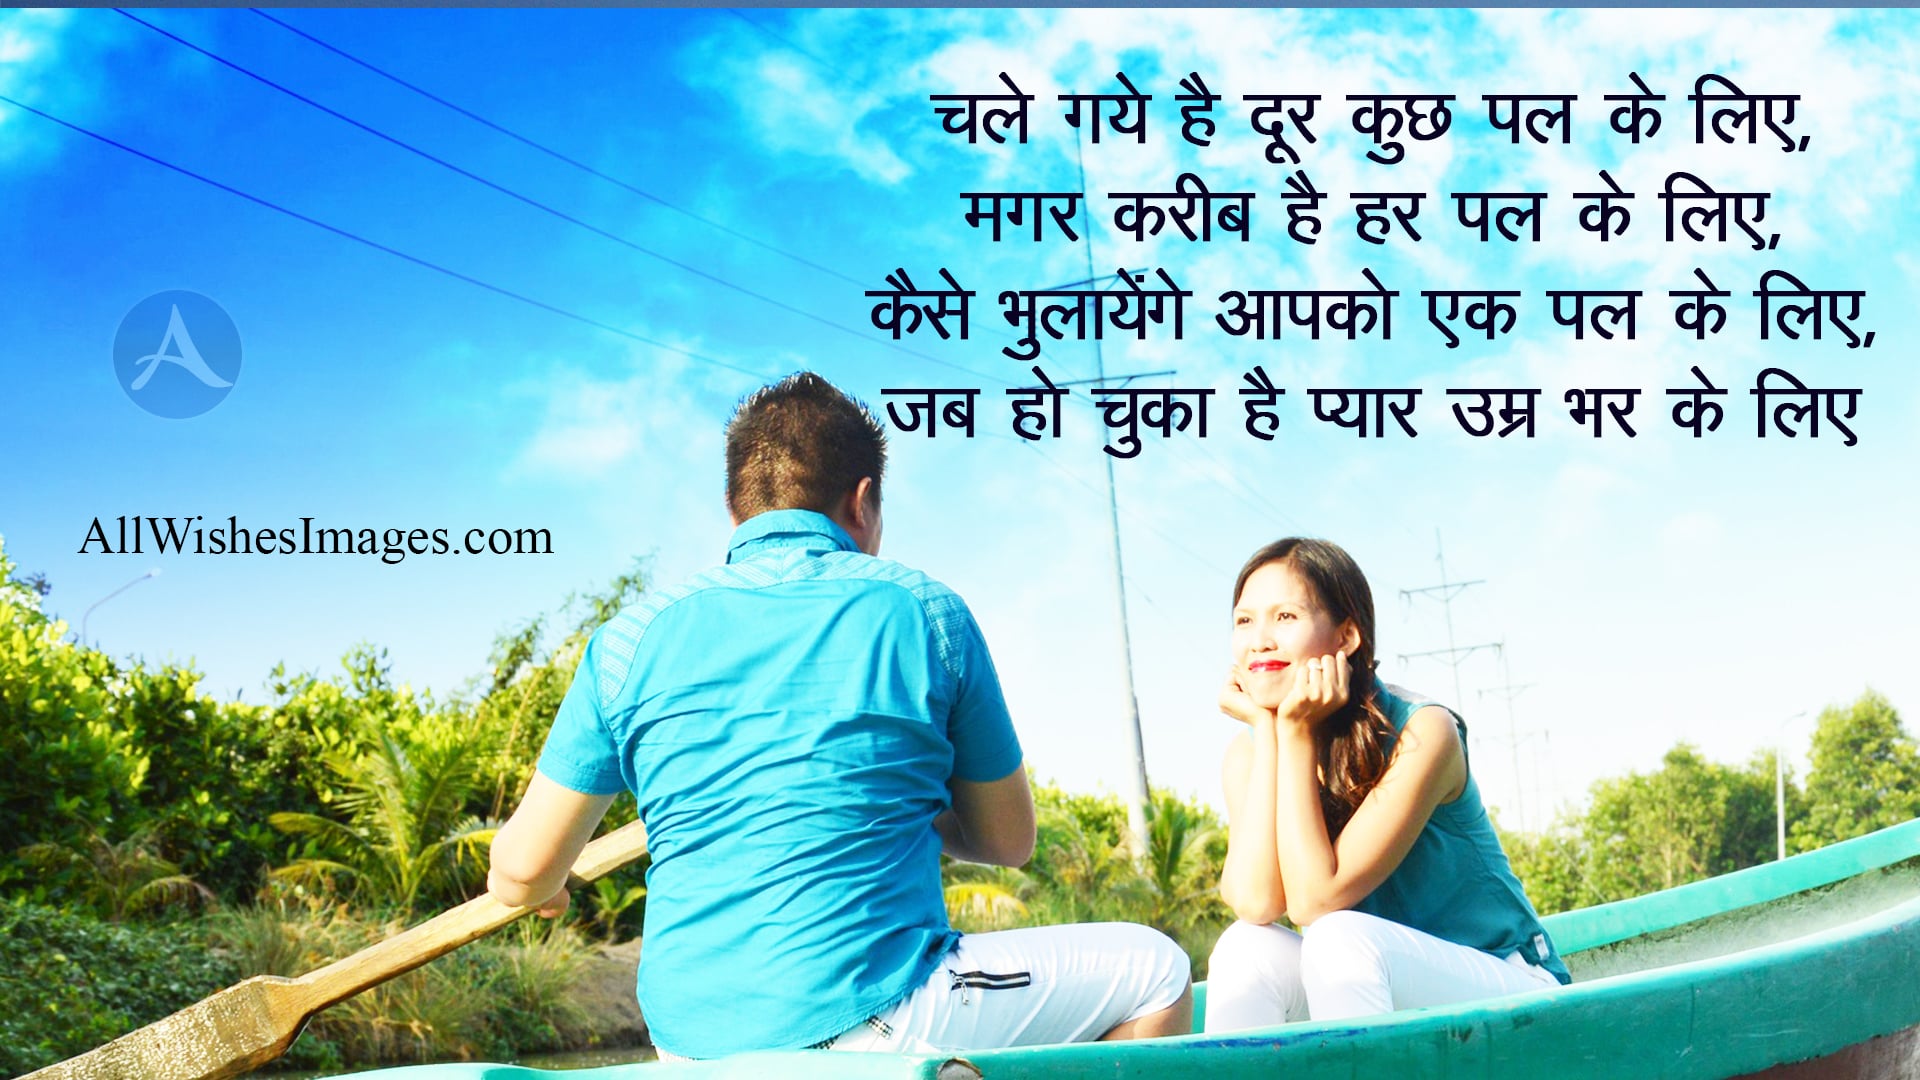 Love Shayari In Hindi For Bf With Images Download - All Wishes Images -  Images for WhatsApp